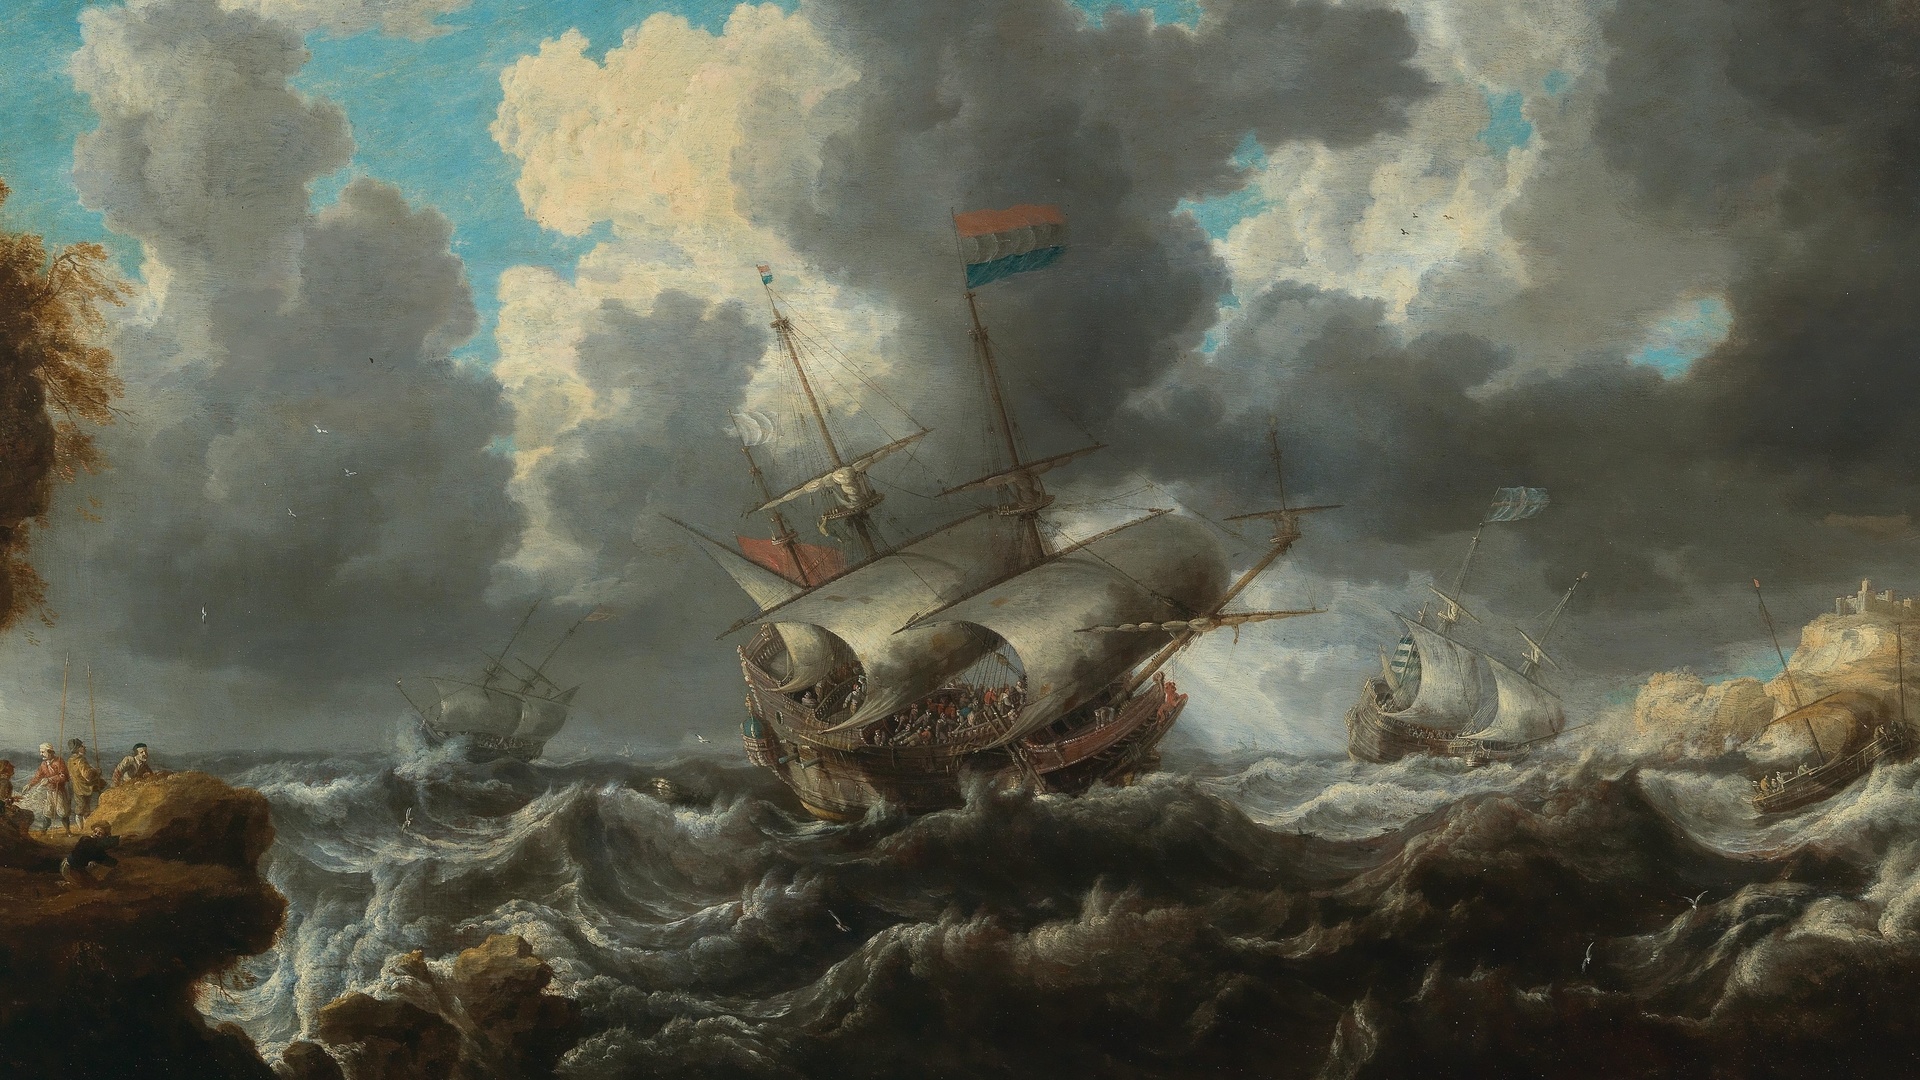 bonaventura peeters, flemish, 1641, a man owar in choppy seas with soldiers on an outcrop nearby